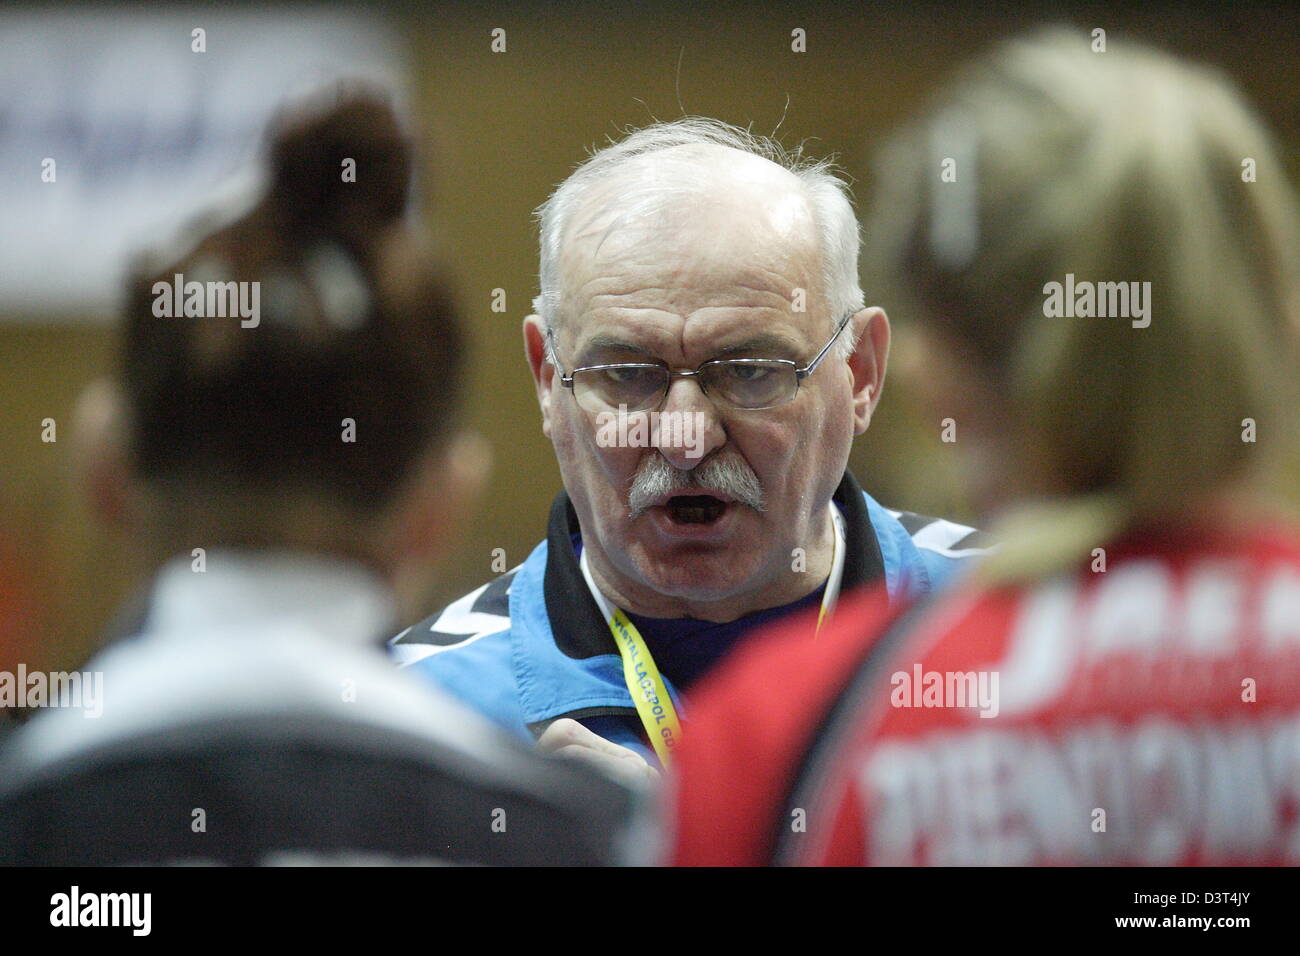 Poland 24th, February 2013 Handball: Final Four of the PGNiG Polish Cup. Vistal Laczpol Gdynia v KPR Ruch Chorzow game for 3th place in the Cup at HSW sports hall in Gdynia. Janusz Szymczyk - KPR team head coach   during the game Stock Photo